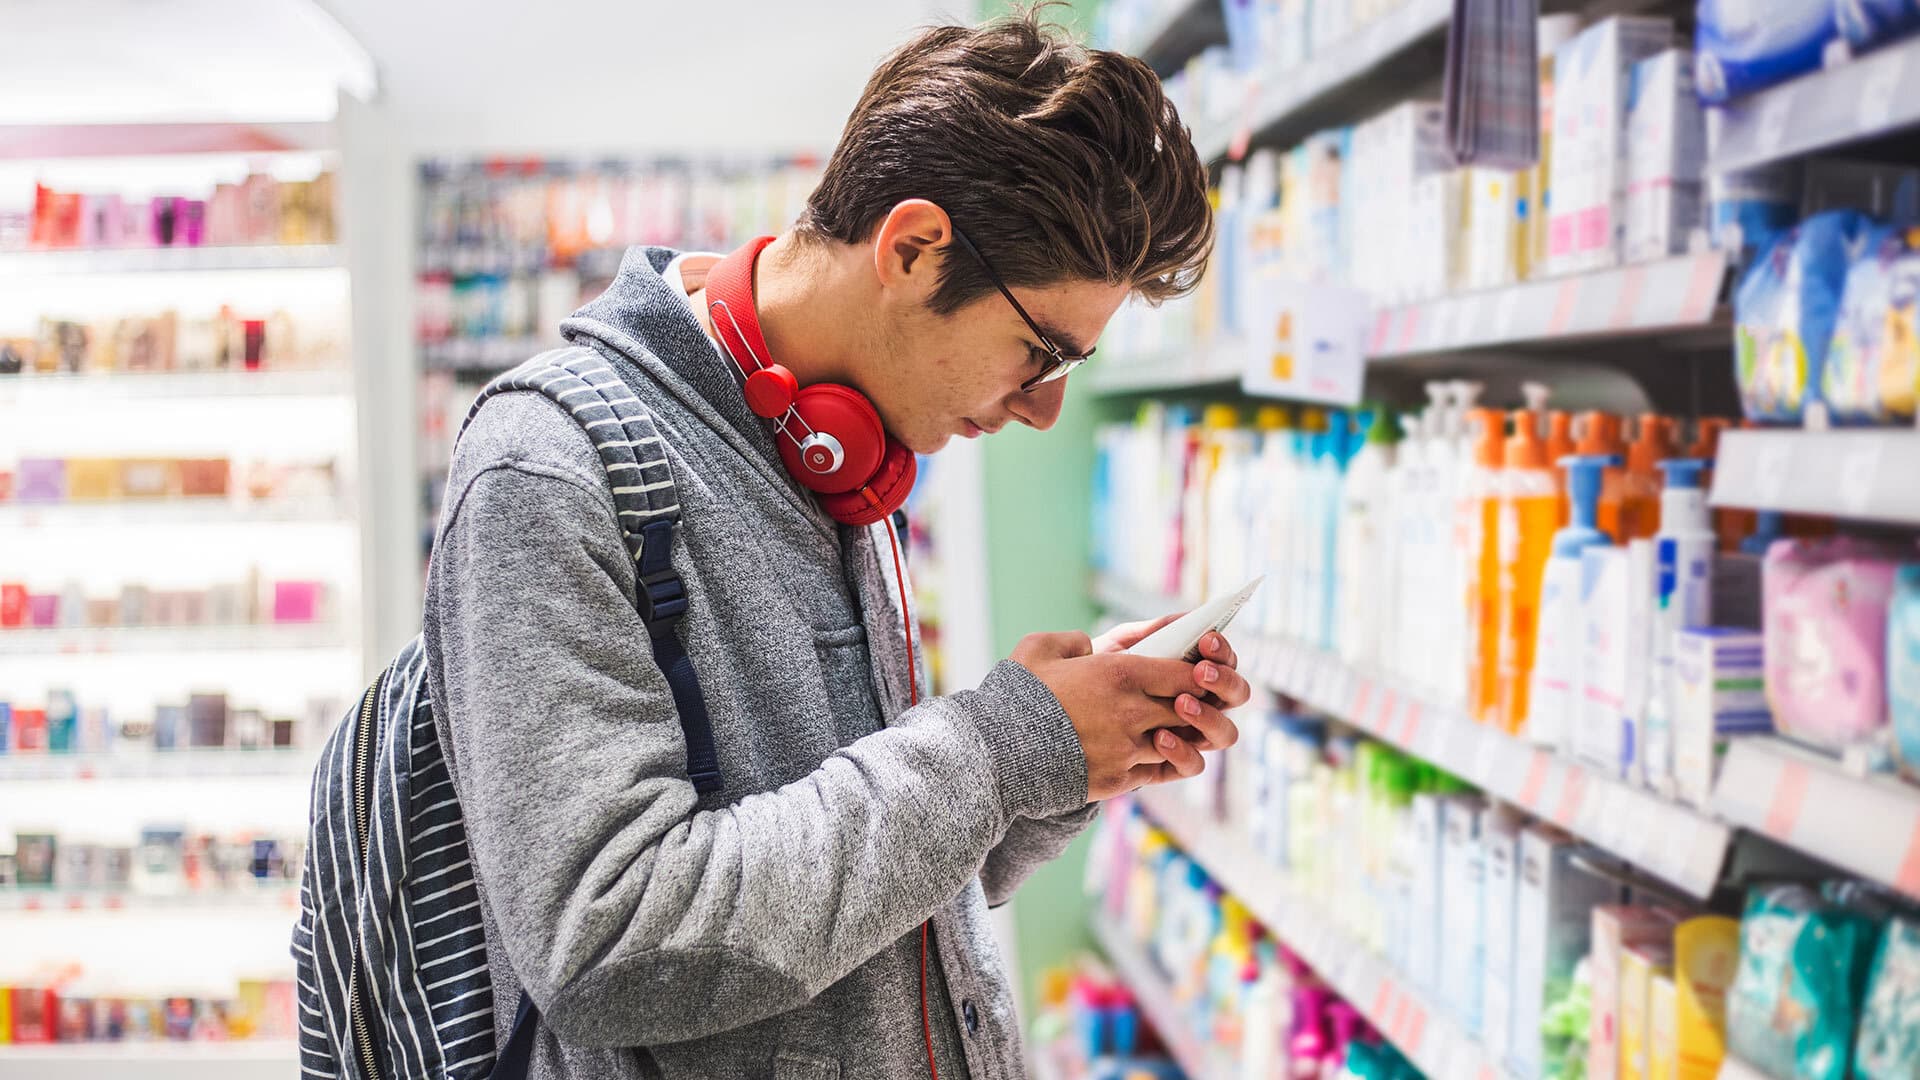 Young man purchasing skin product